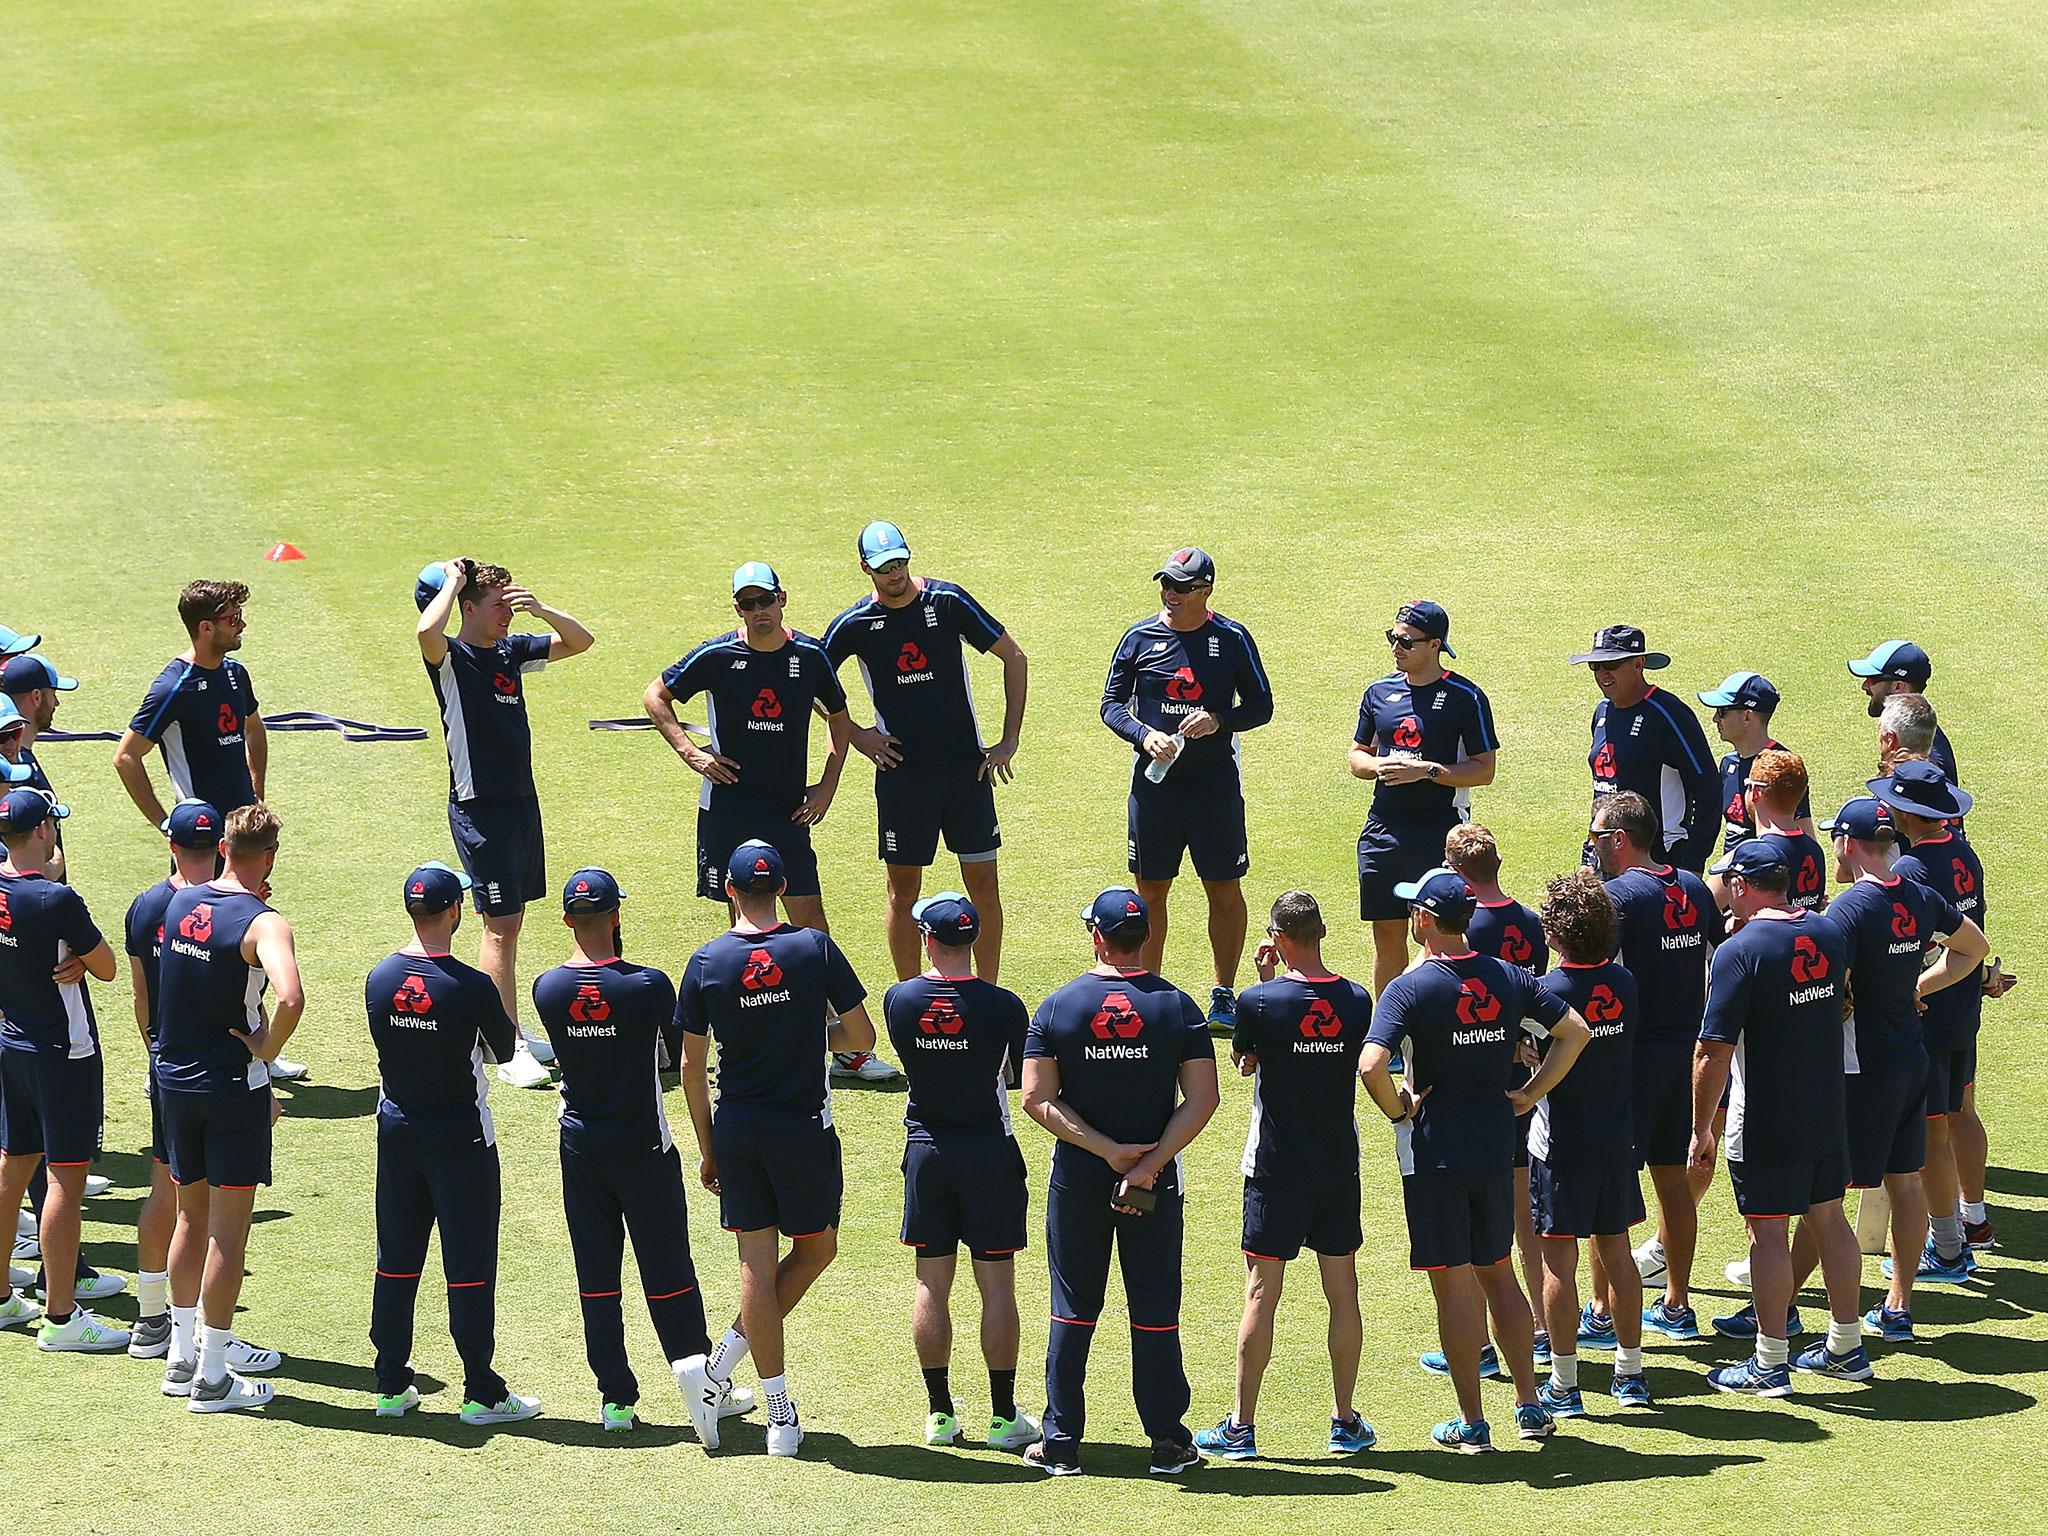 England are training in Perth ahead of the Ashes